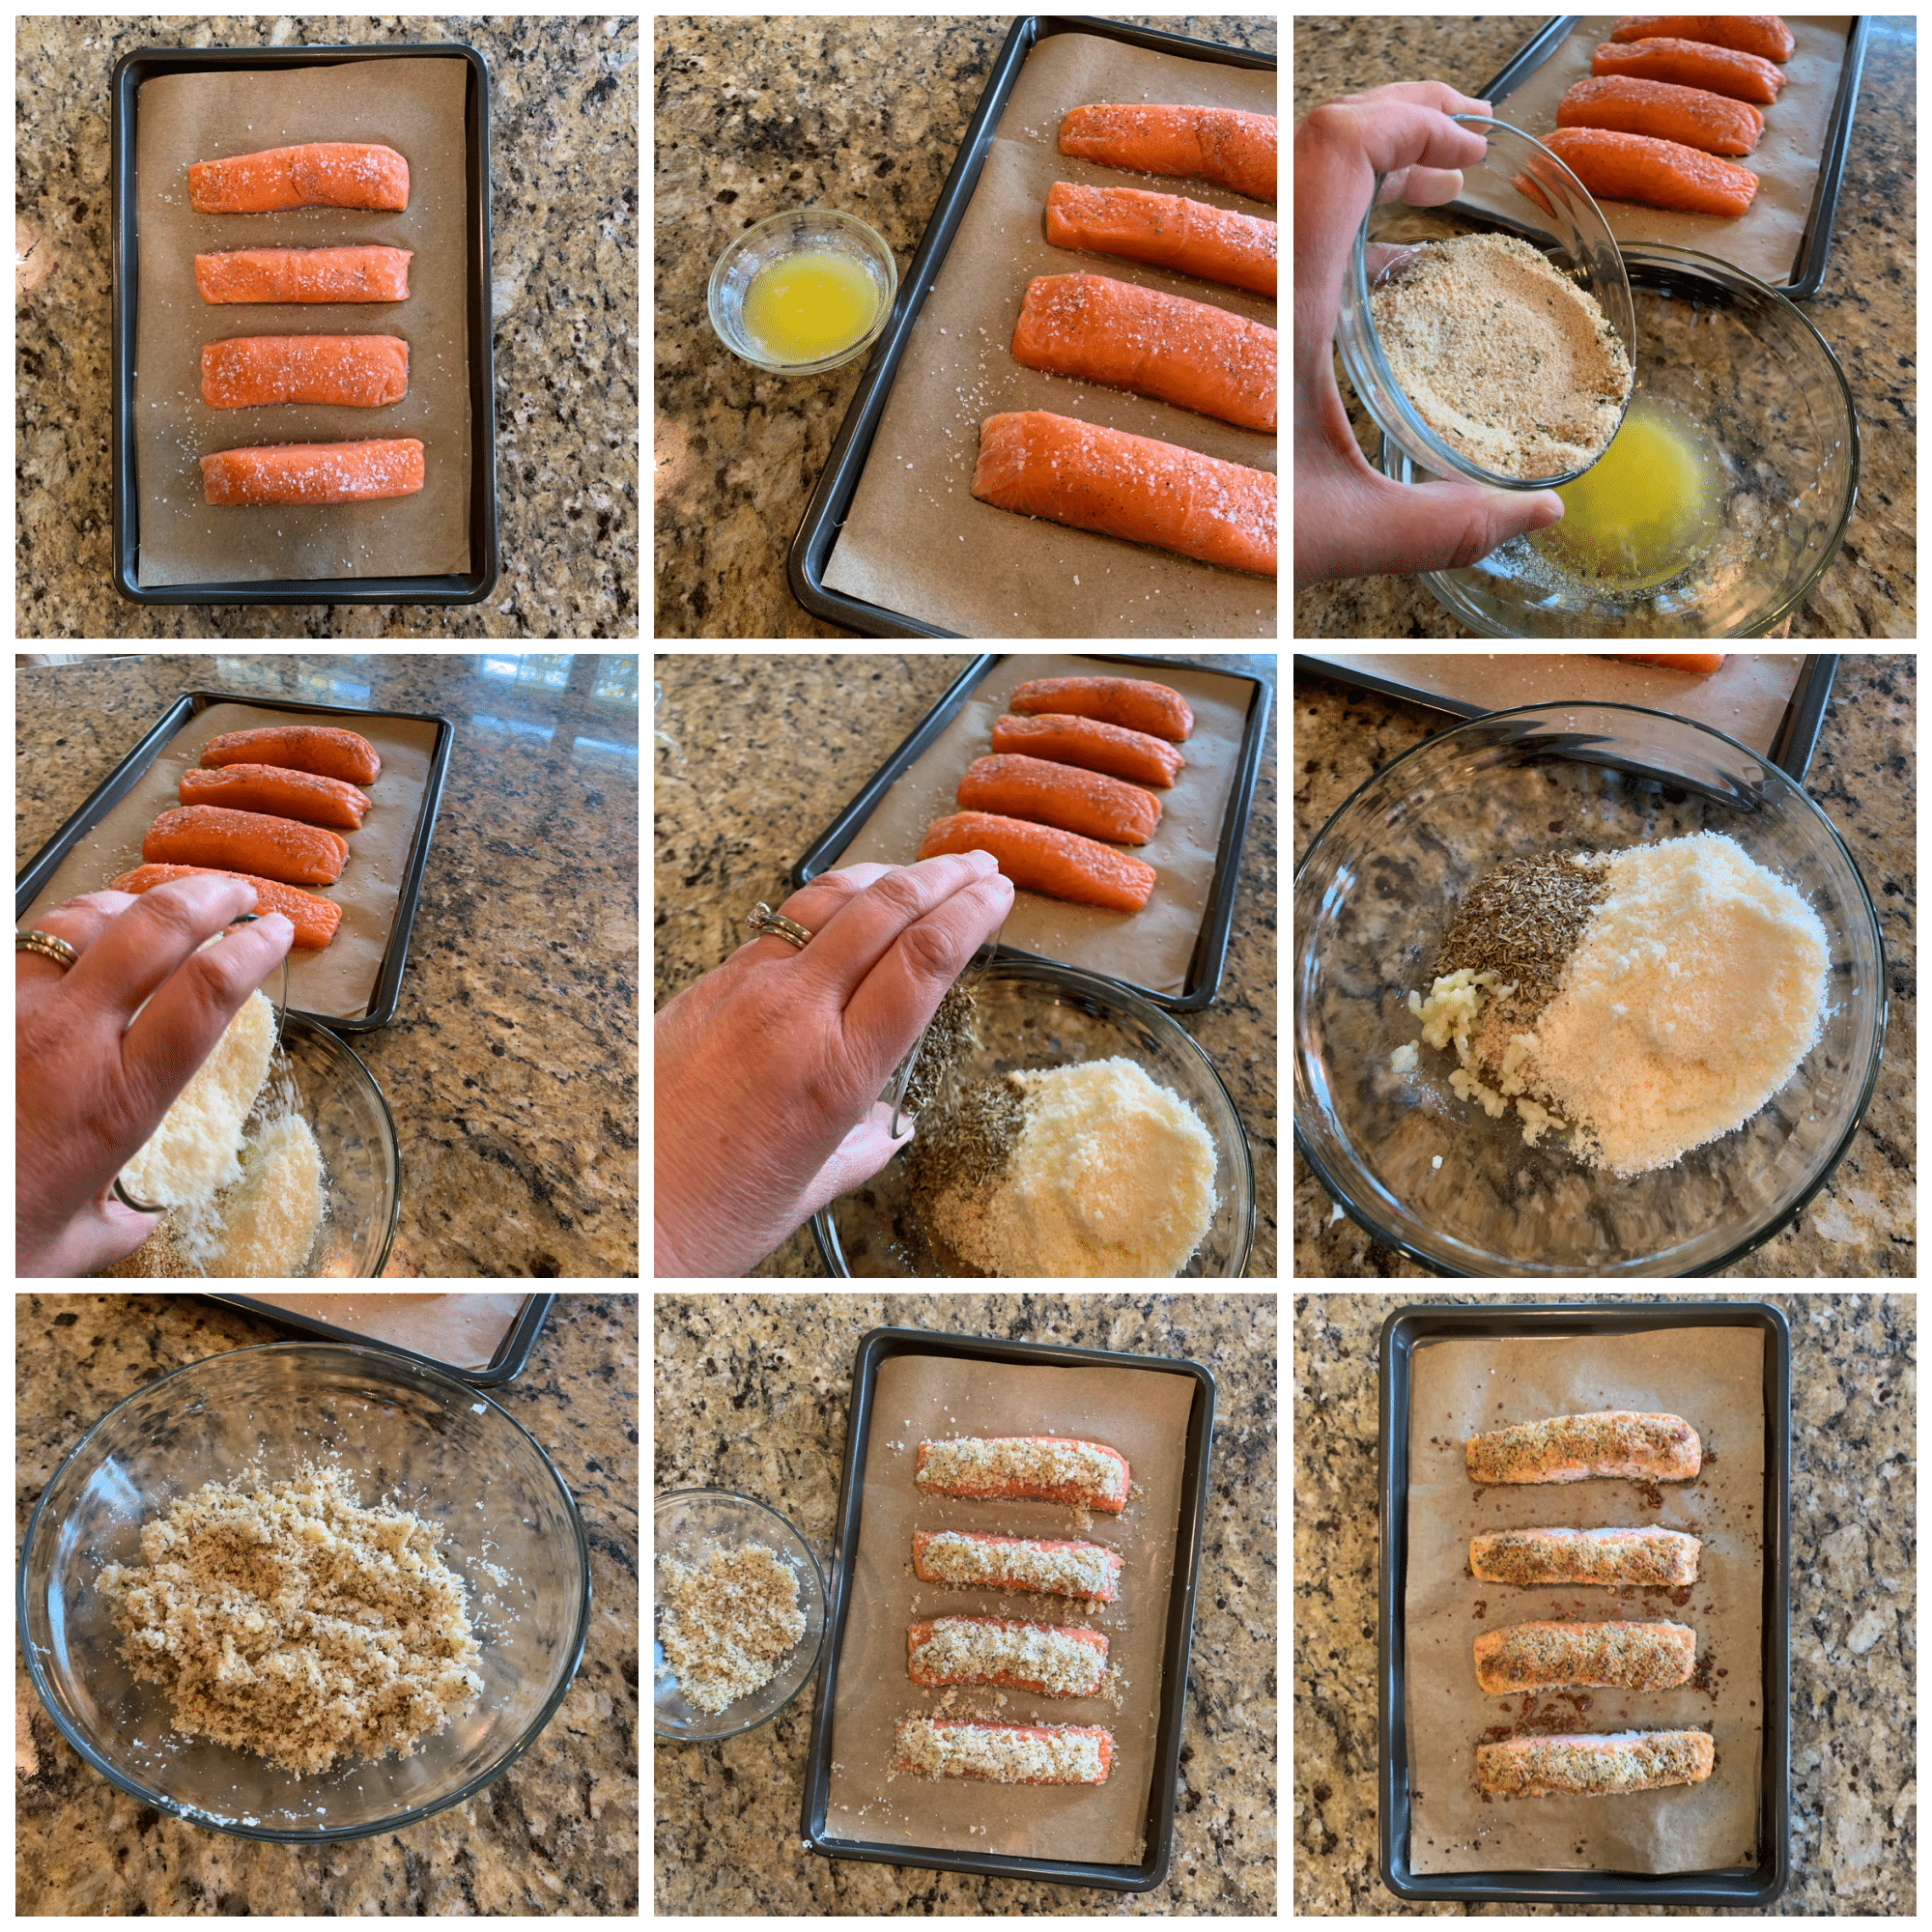 Collage image showing the steps necessary to complete this recipe. 